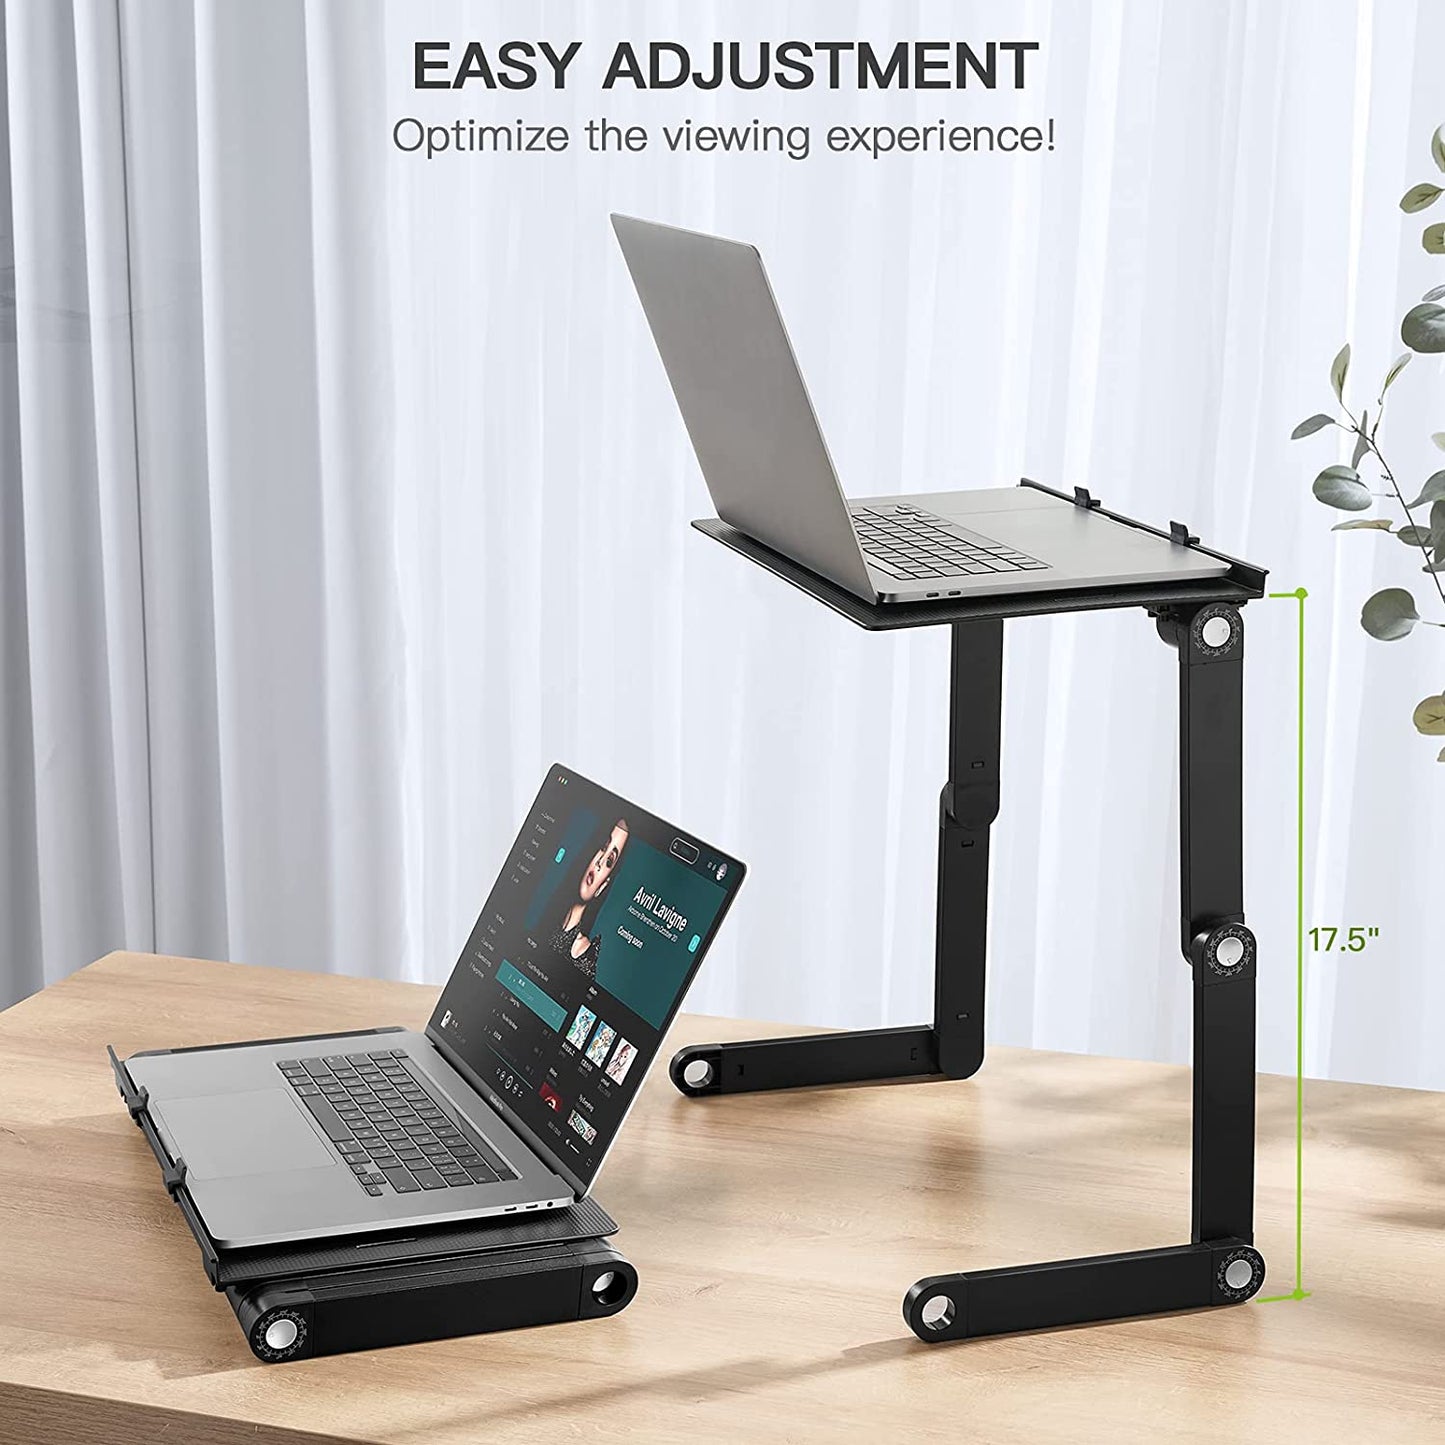 Adjustable Laptop Stand Fits Up To A 15.6" Laptop & Cools Your Laptop